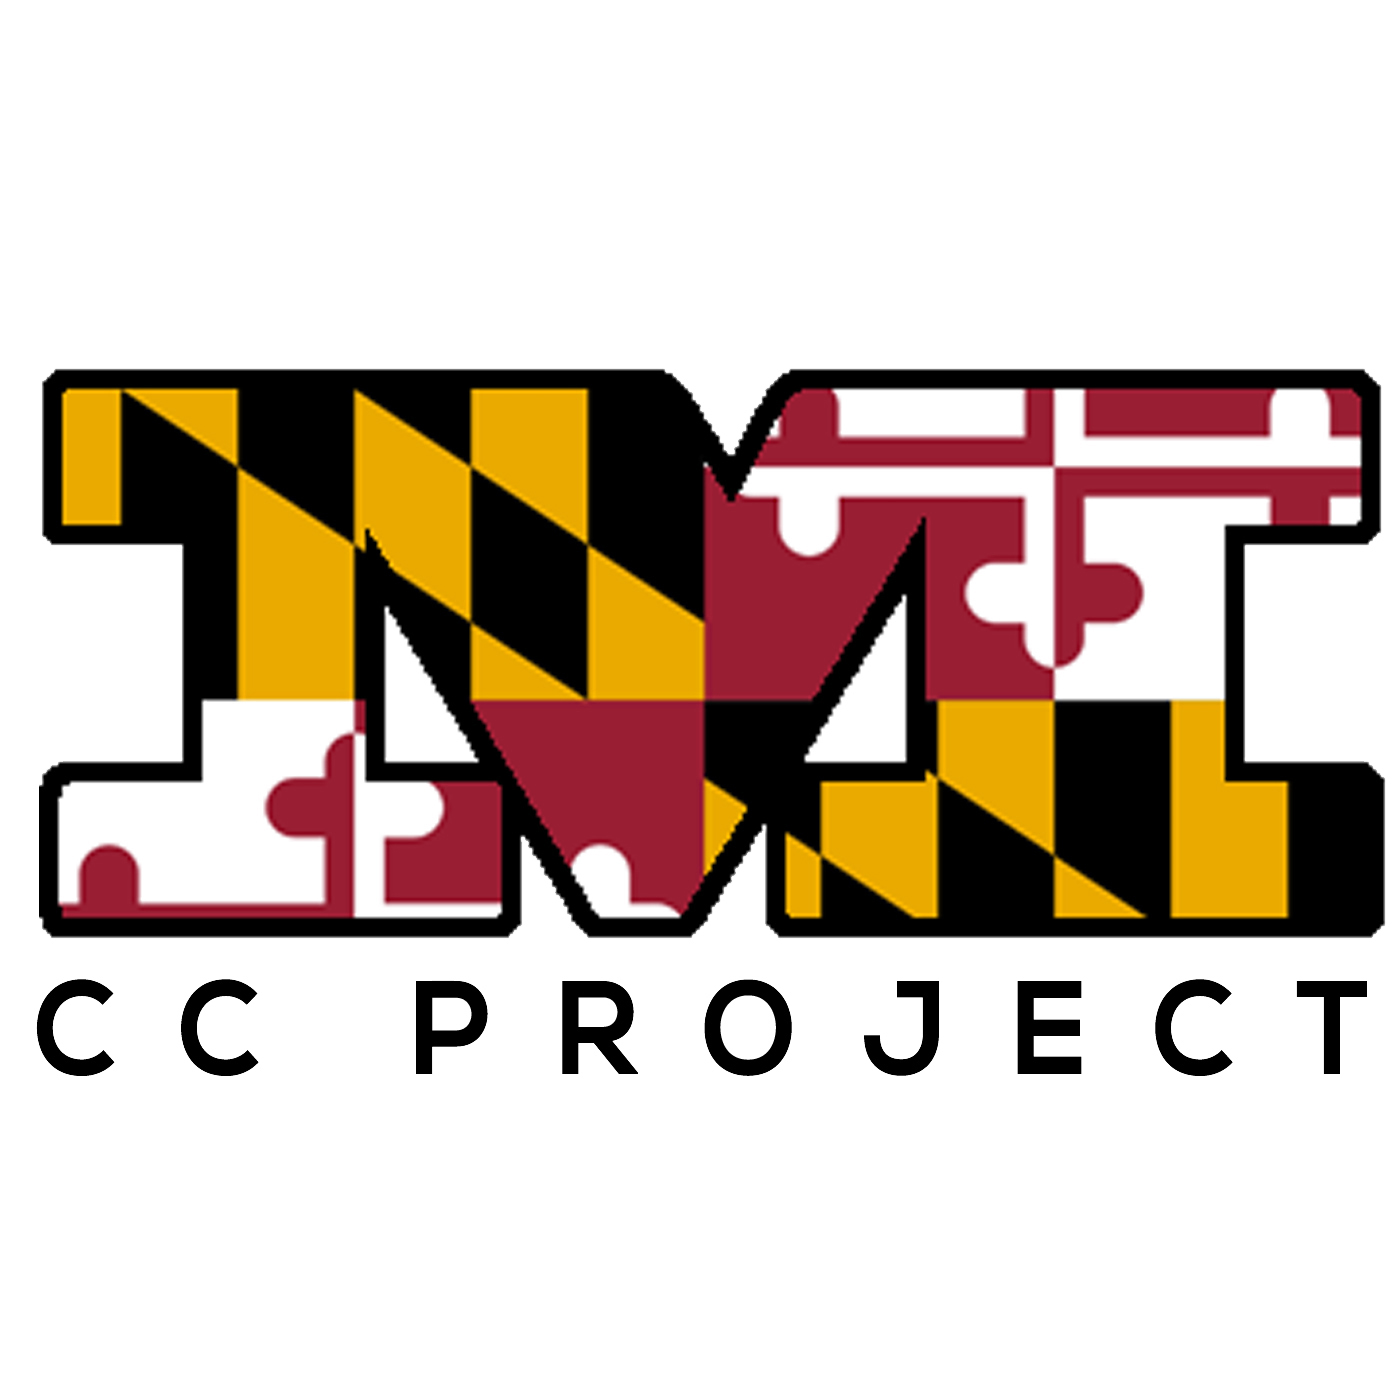 Maryland CC Project Podcast artwork